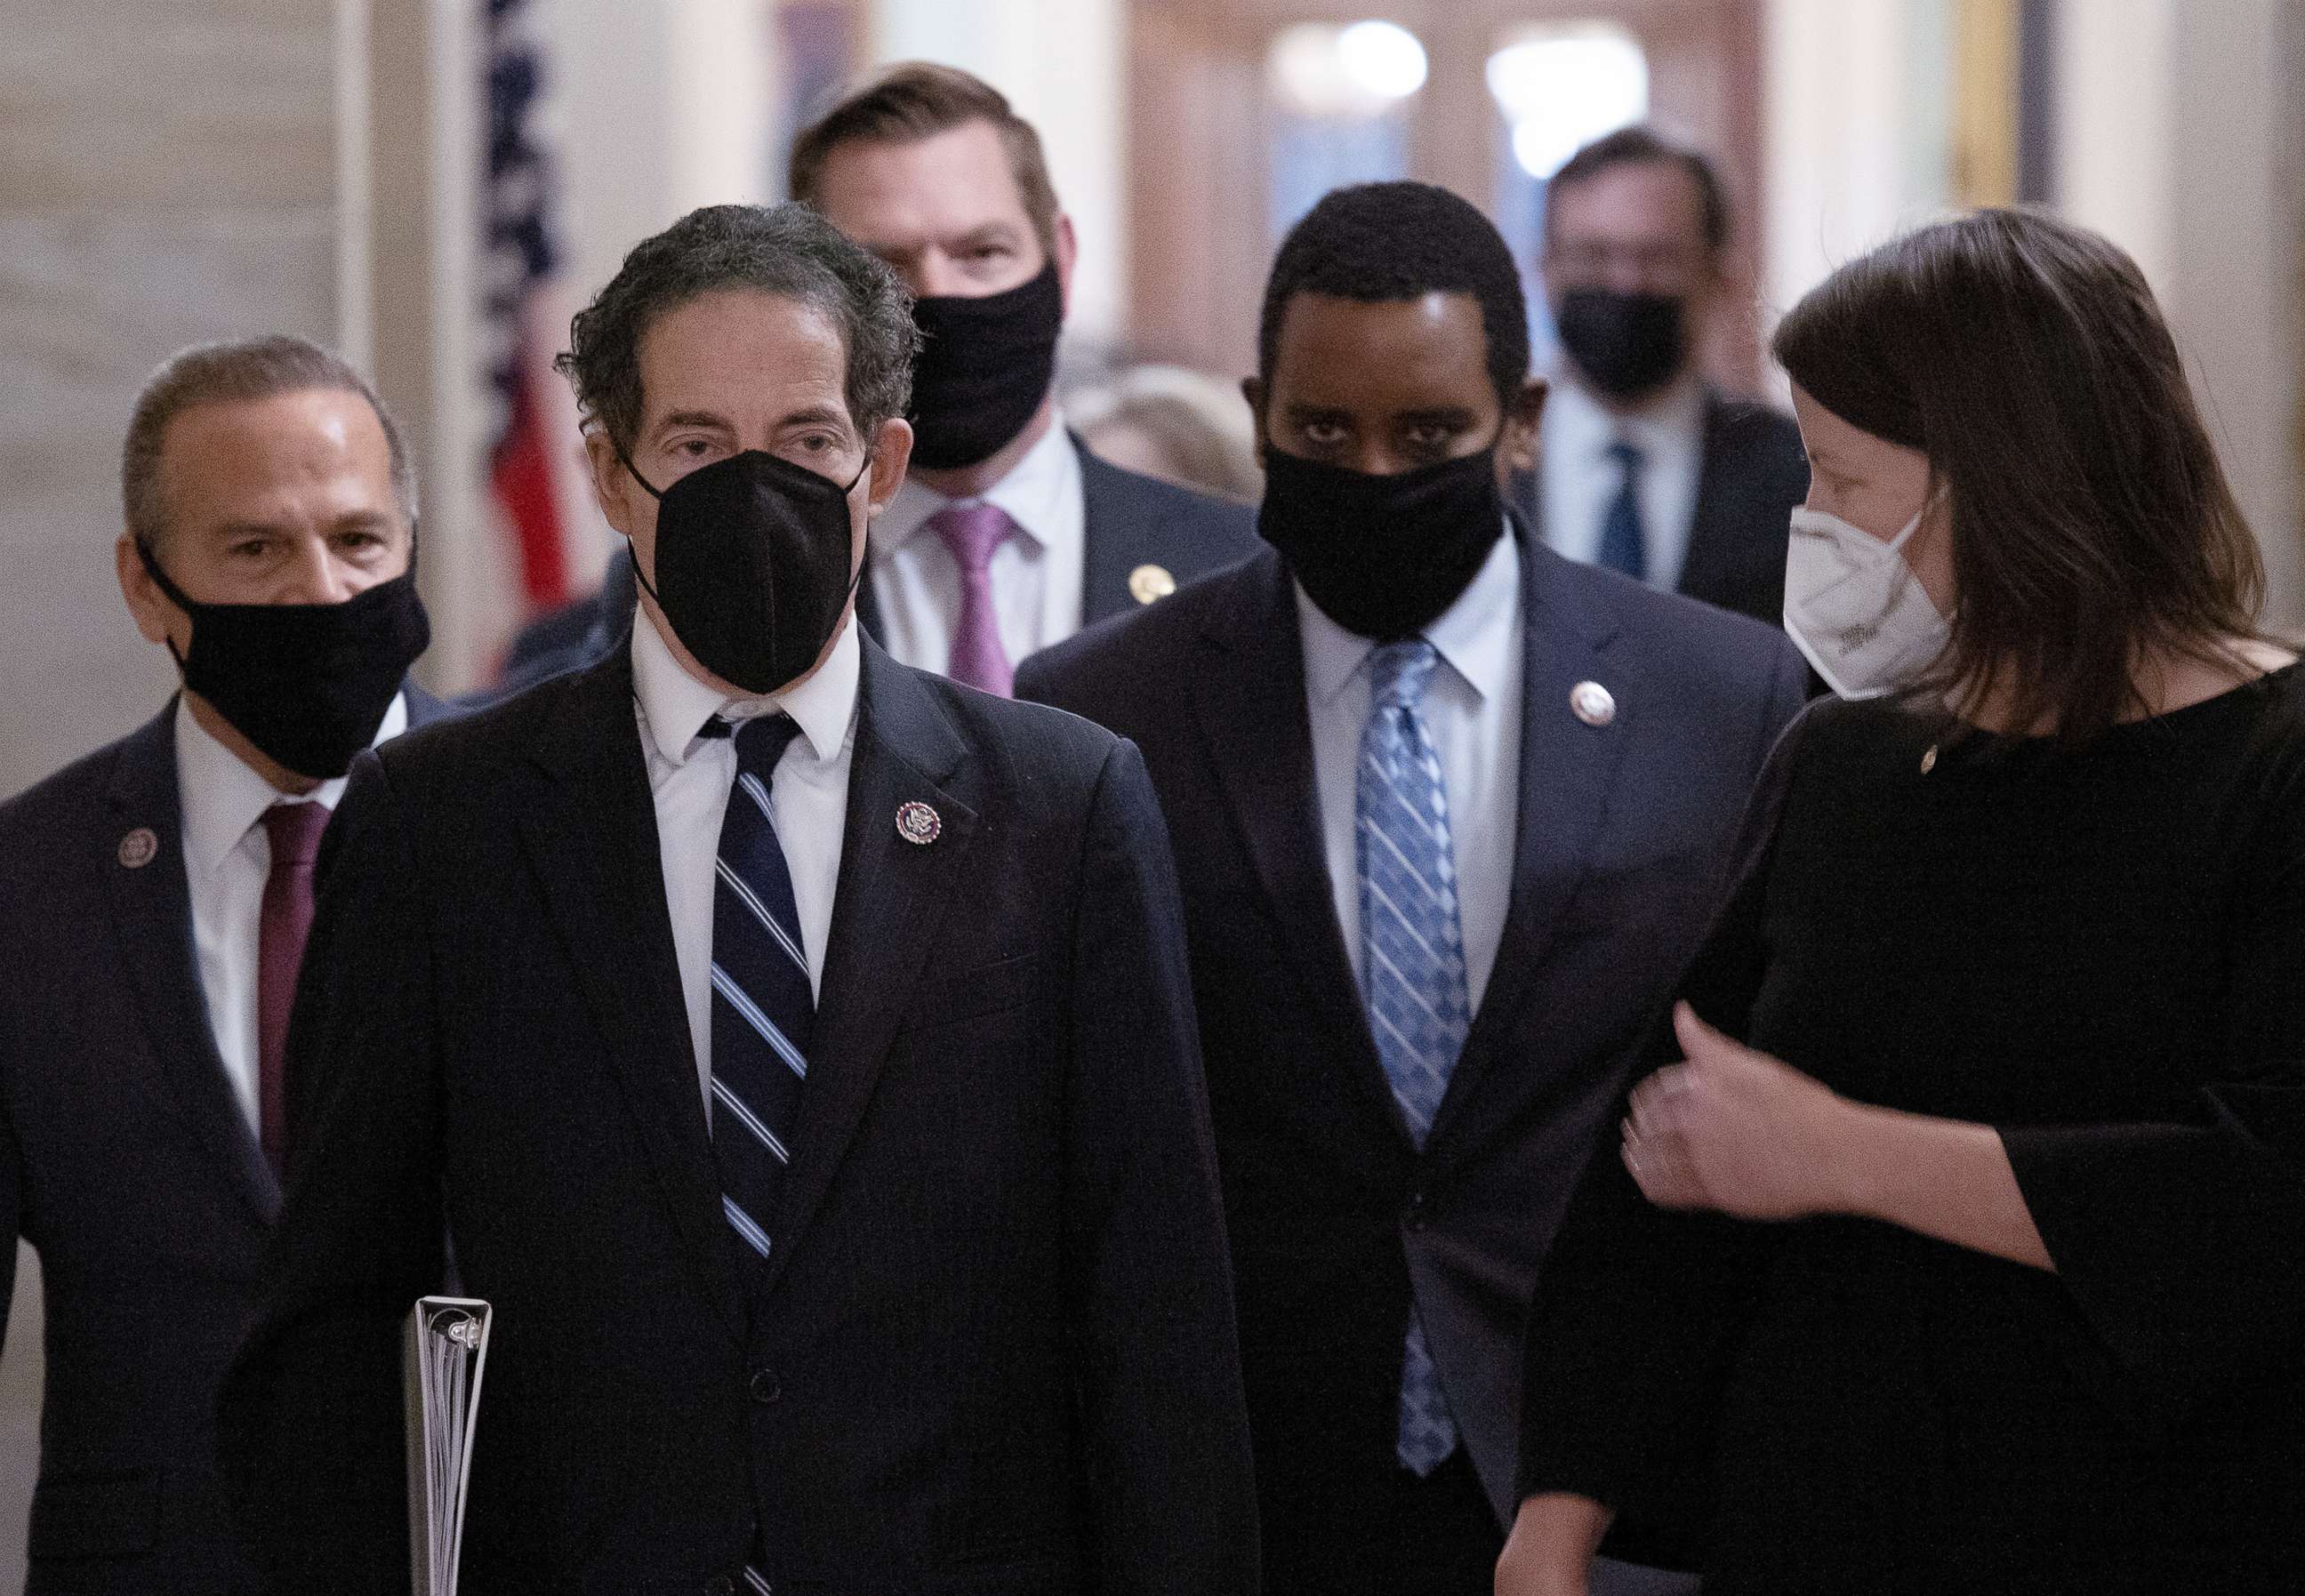 PHOTO: House impeachment managers led by Rep. Jamie Raskin, depart the Senate Chamber at the conclusion of former President Donald Trump's second impeachment trial, Feb. 13, 2021, in Washington, D.C. The Senate voted 57-43 to acquit Trump.